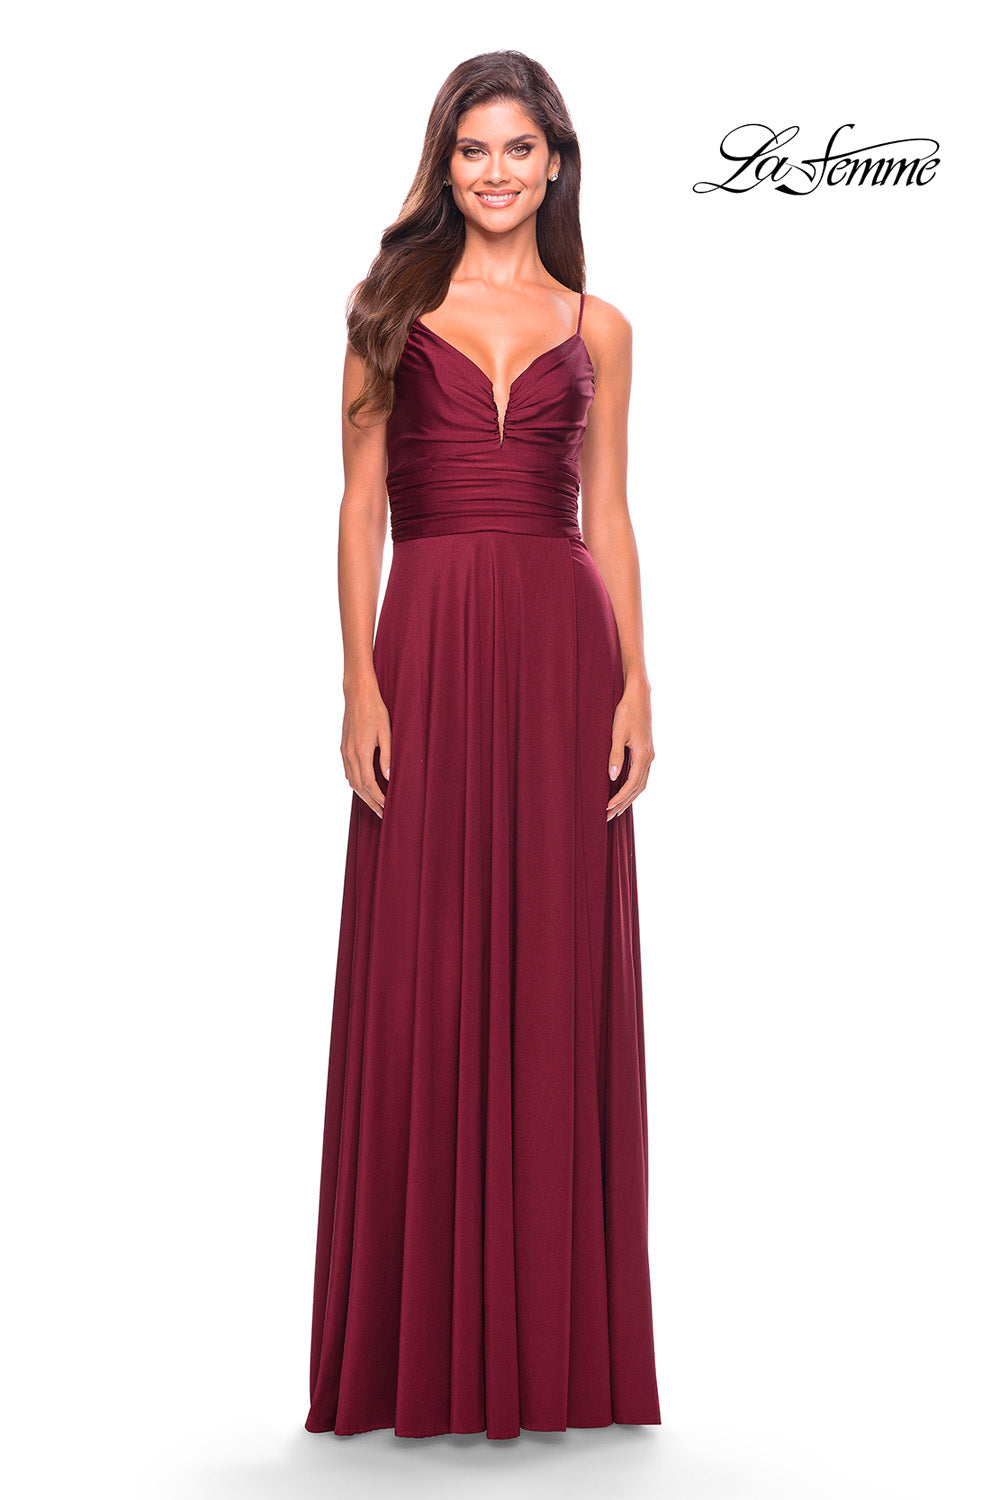 La Femme 31090 prom dress images.  La Femme 31090 is available in these colors: Black, Dark Berry, Emerald, Nude, Silver.